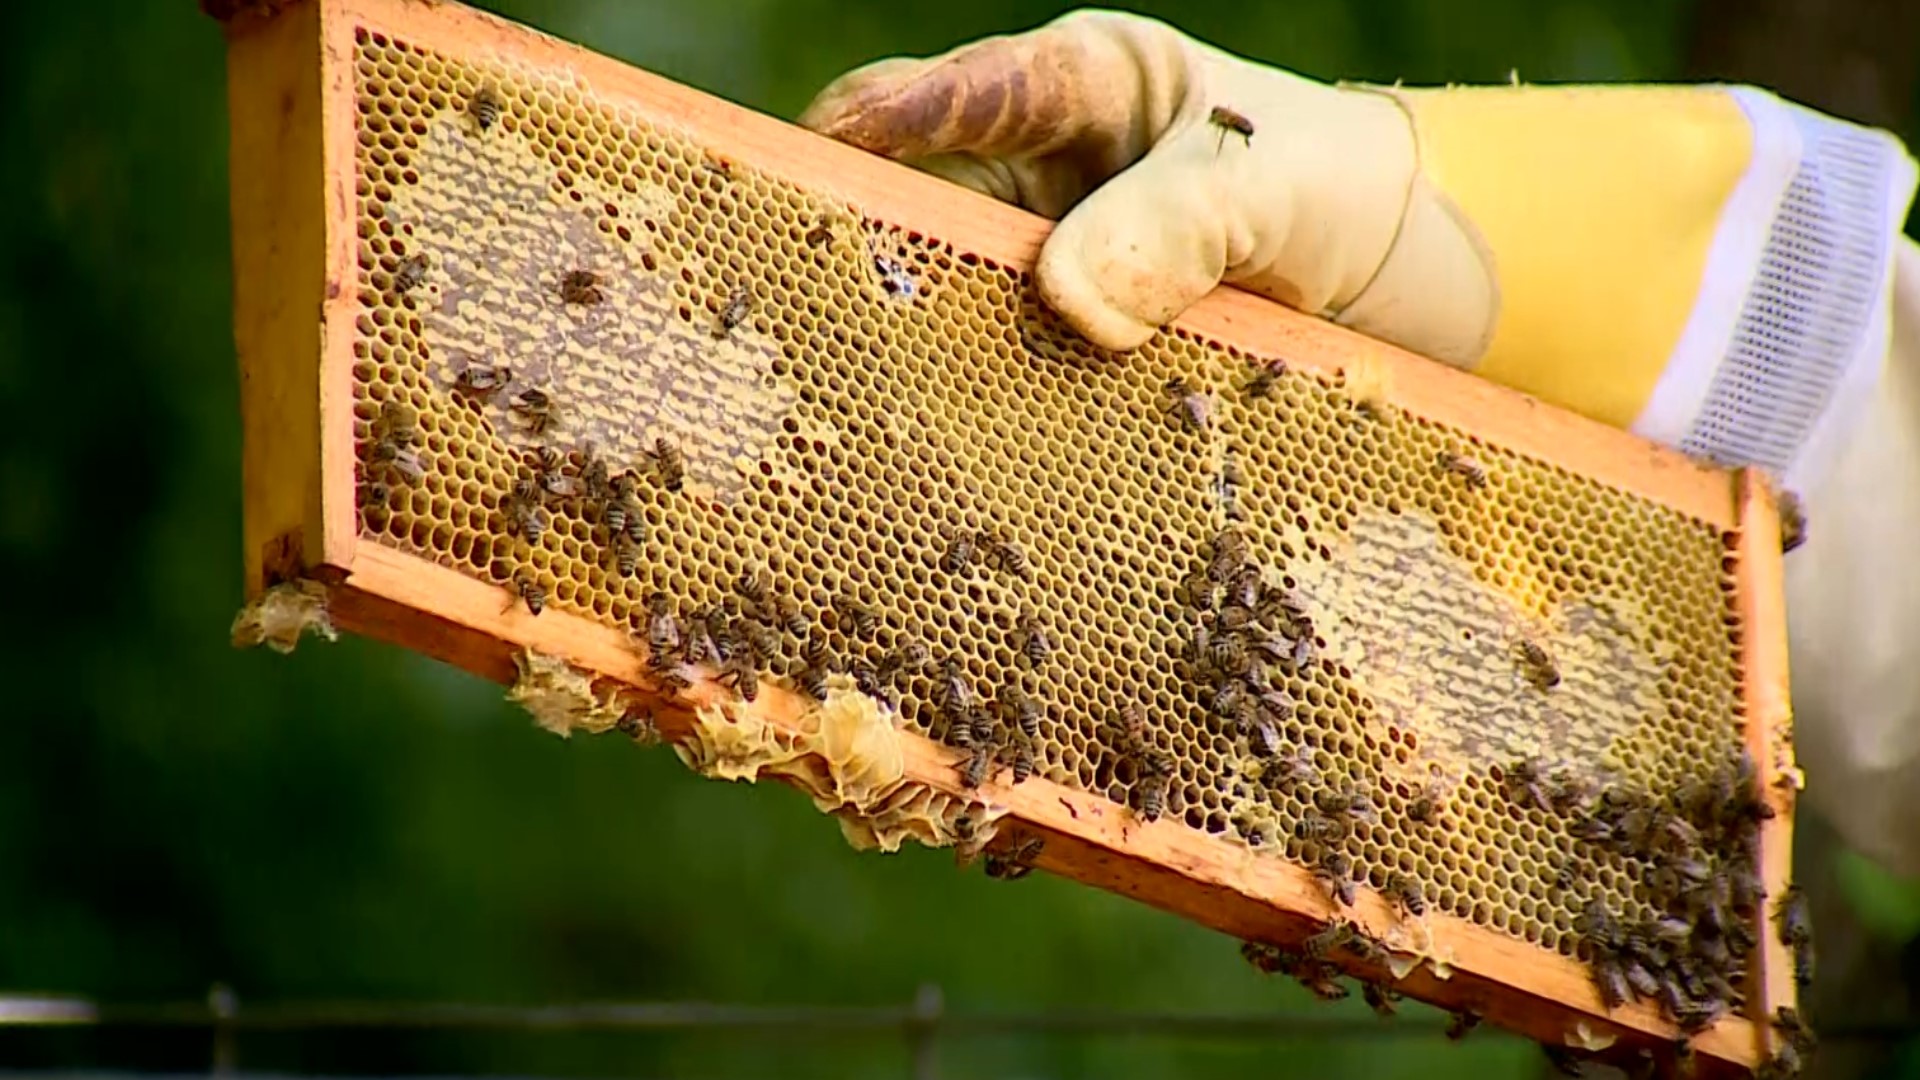 The Fayetteville Public Library and the Shiloh Museum manage beehives, educating the public about vital insects. A master beekeeper says they develop 80% of food.